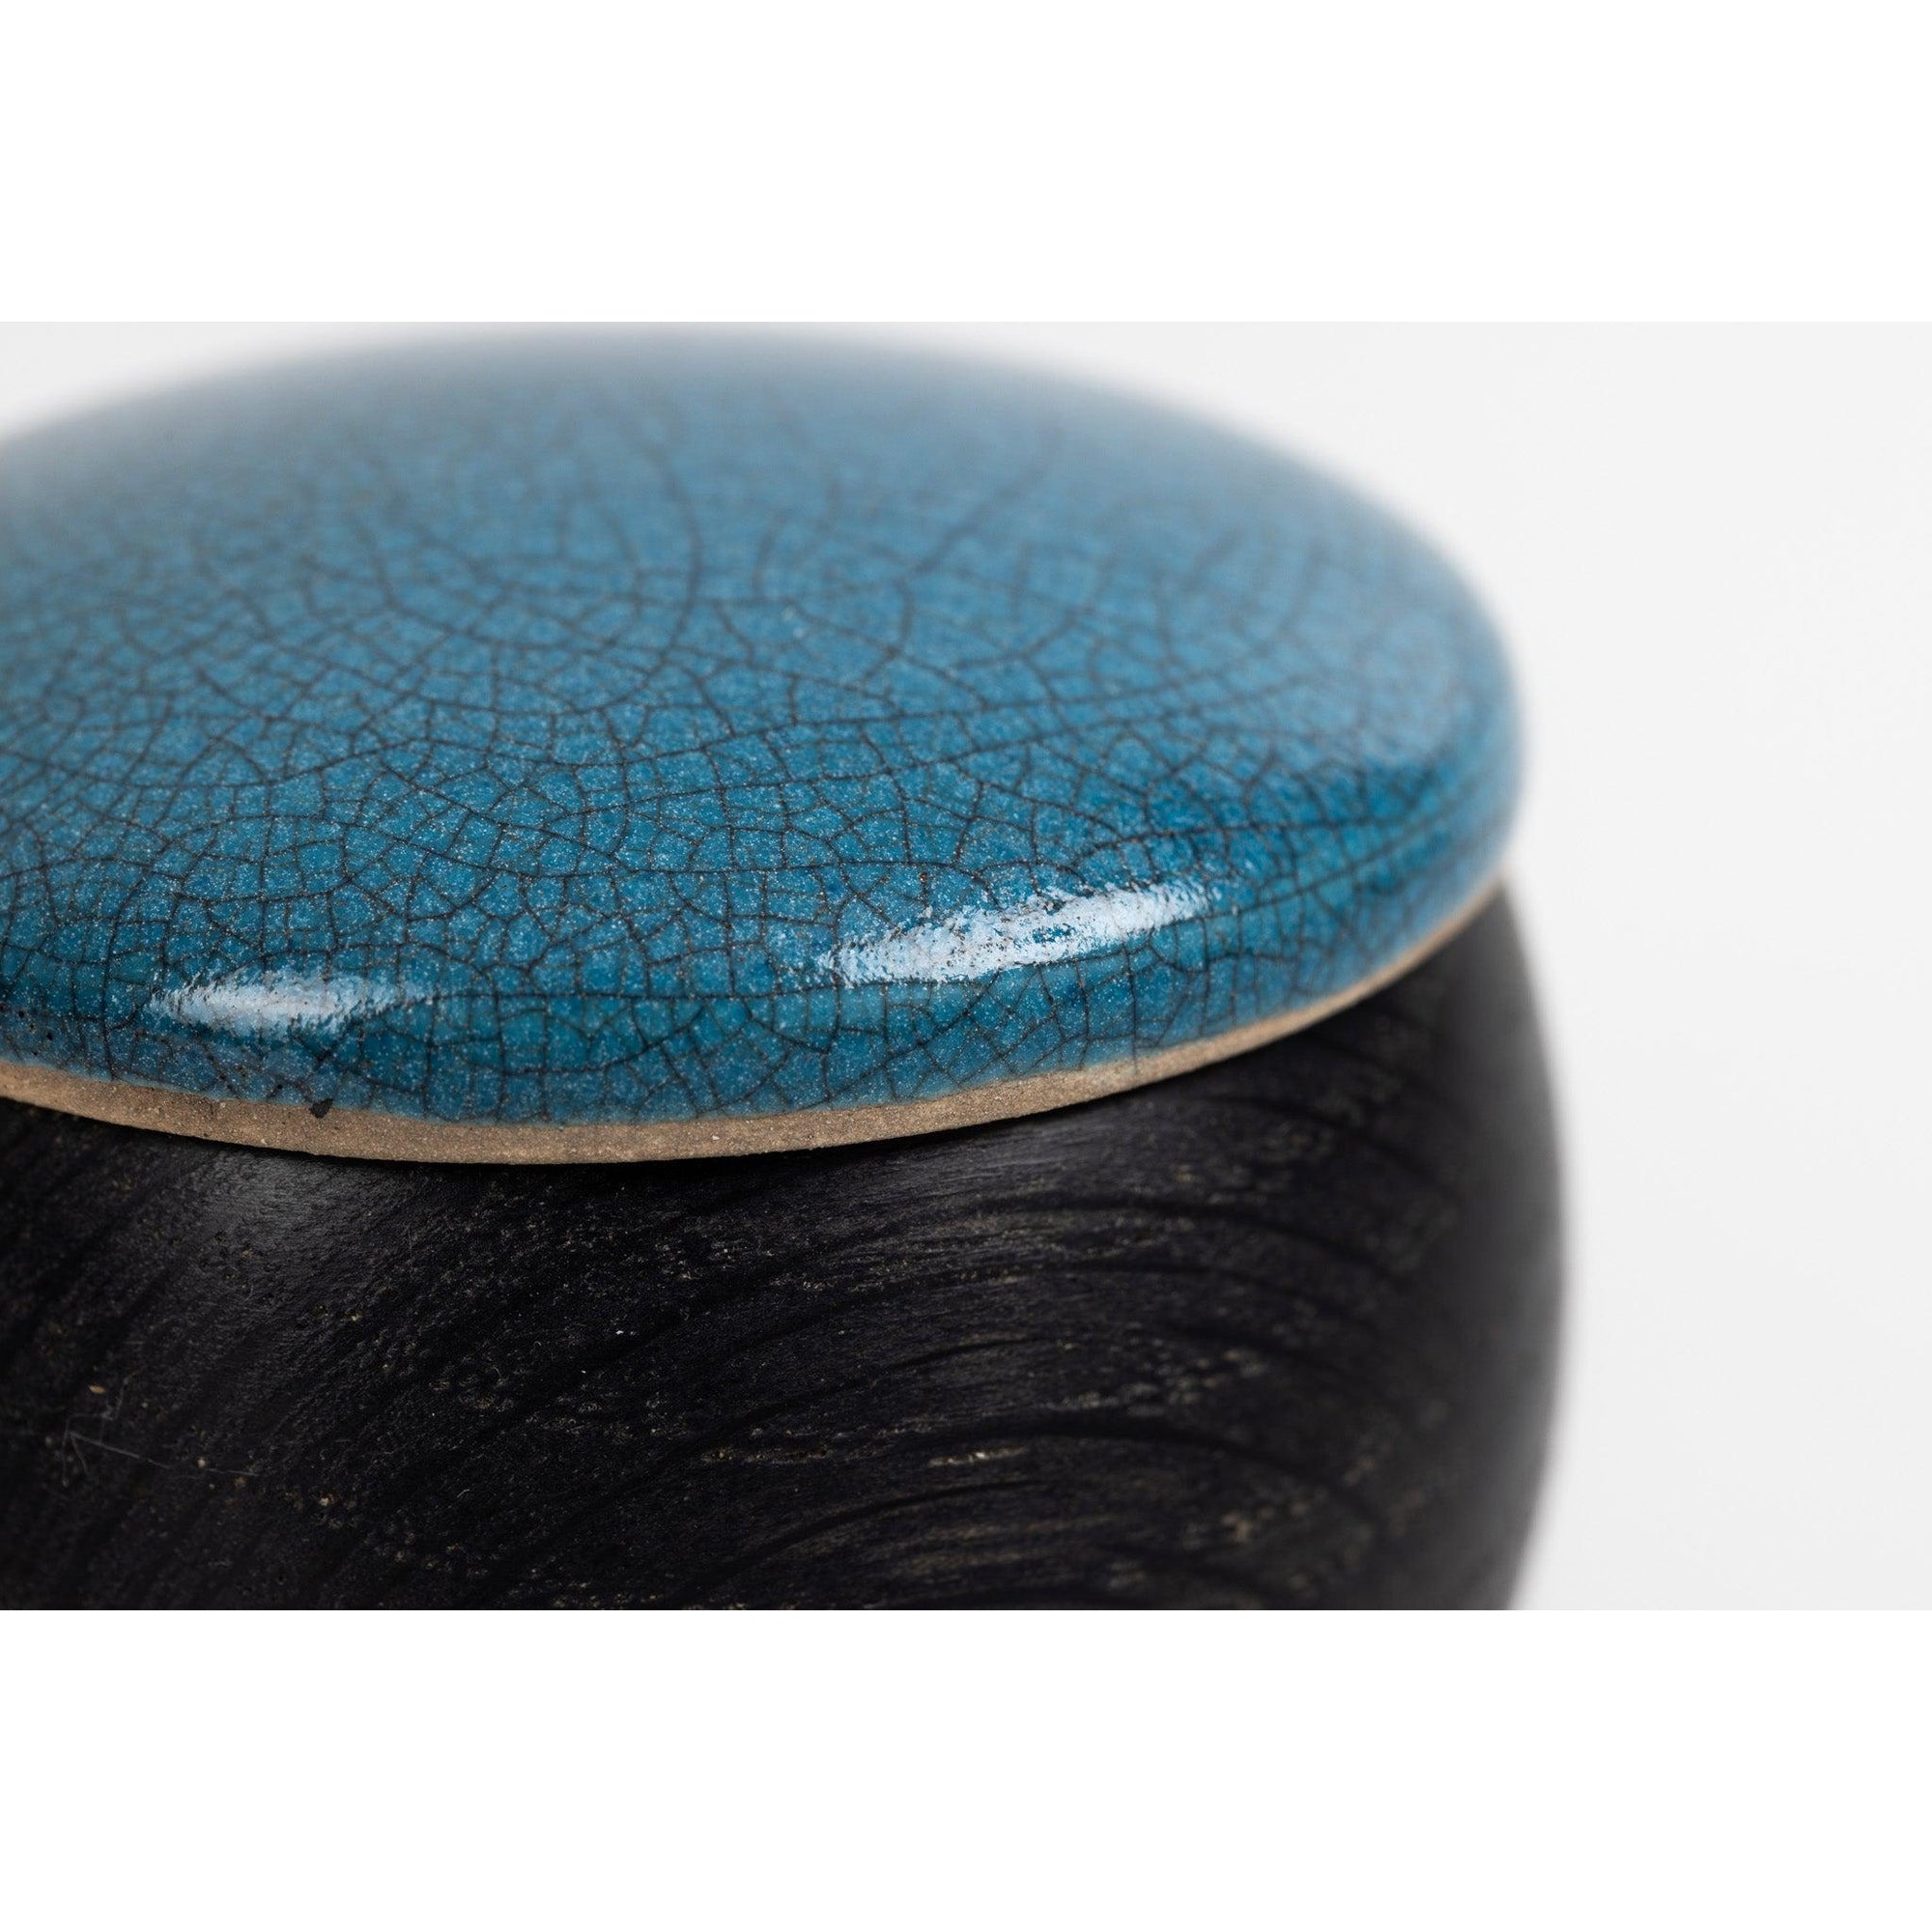 KSCC2 Ebonised Wave Pot by Kate Schuricht, available at Padstow Gallery, Cornwall